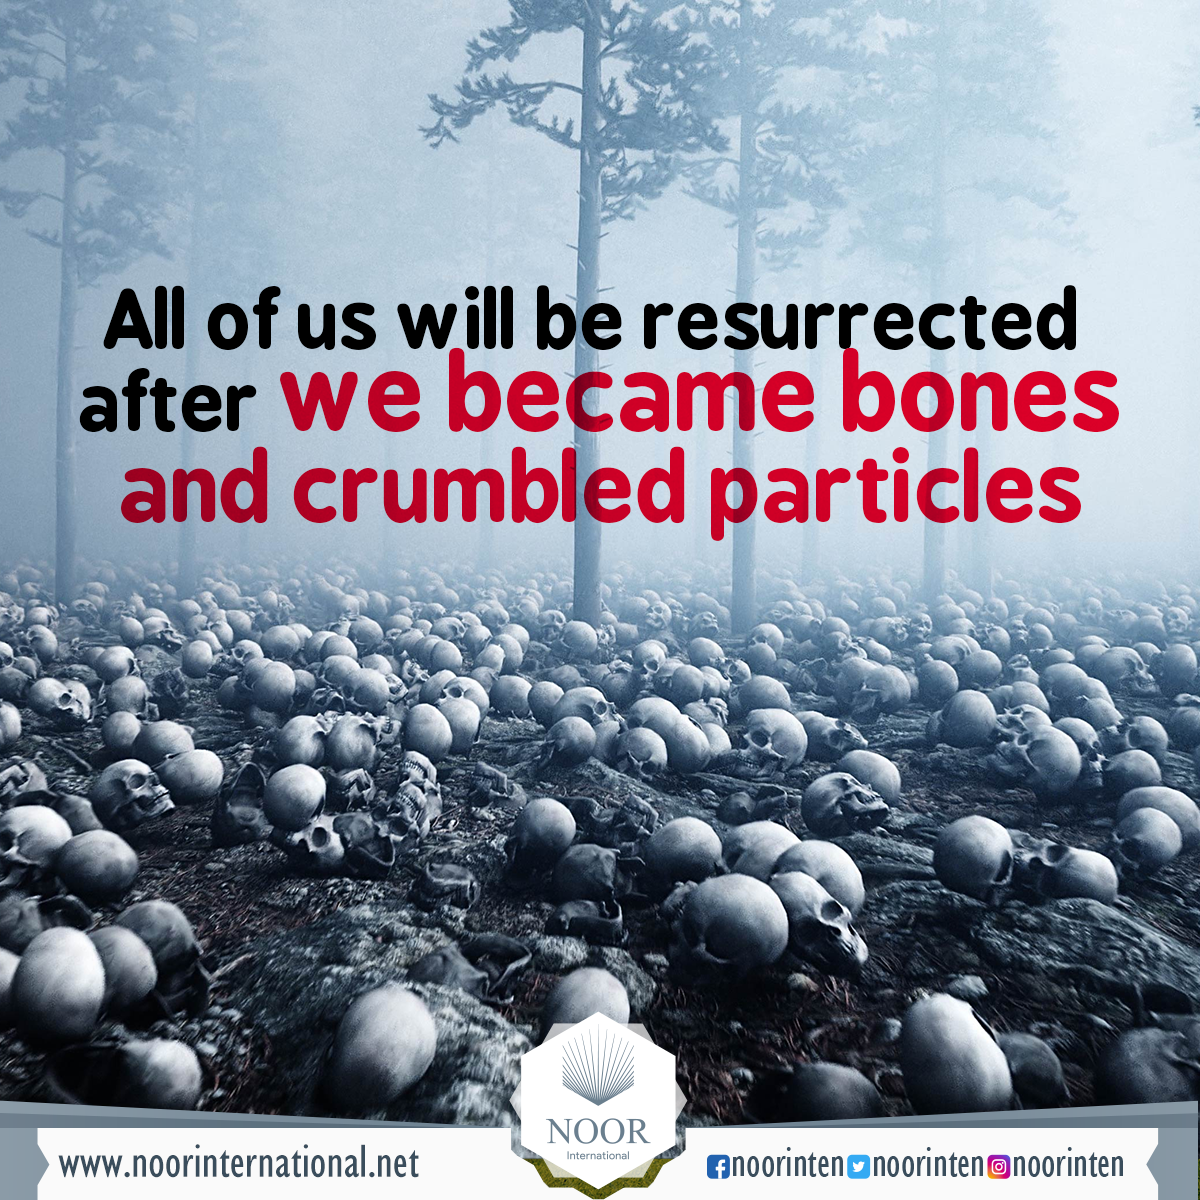 All of us will be resurrected after we became bones and crumbled particles